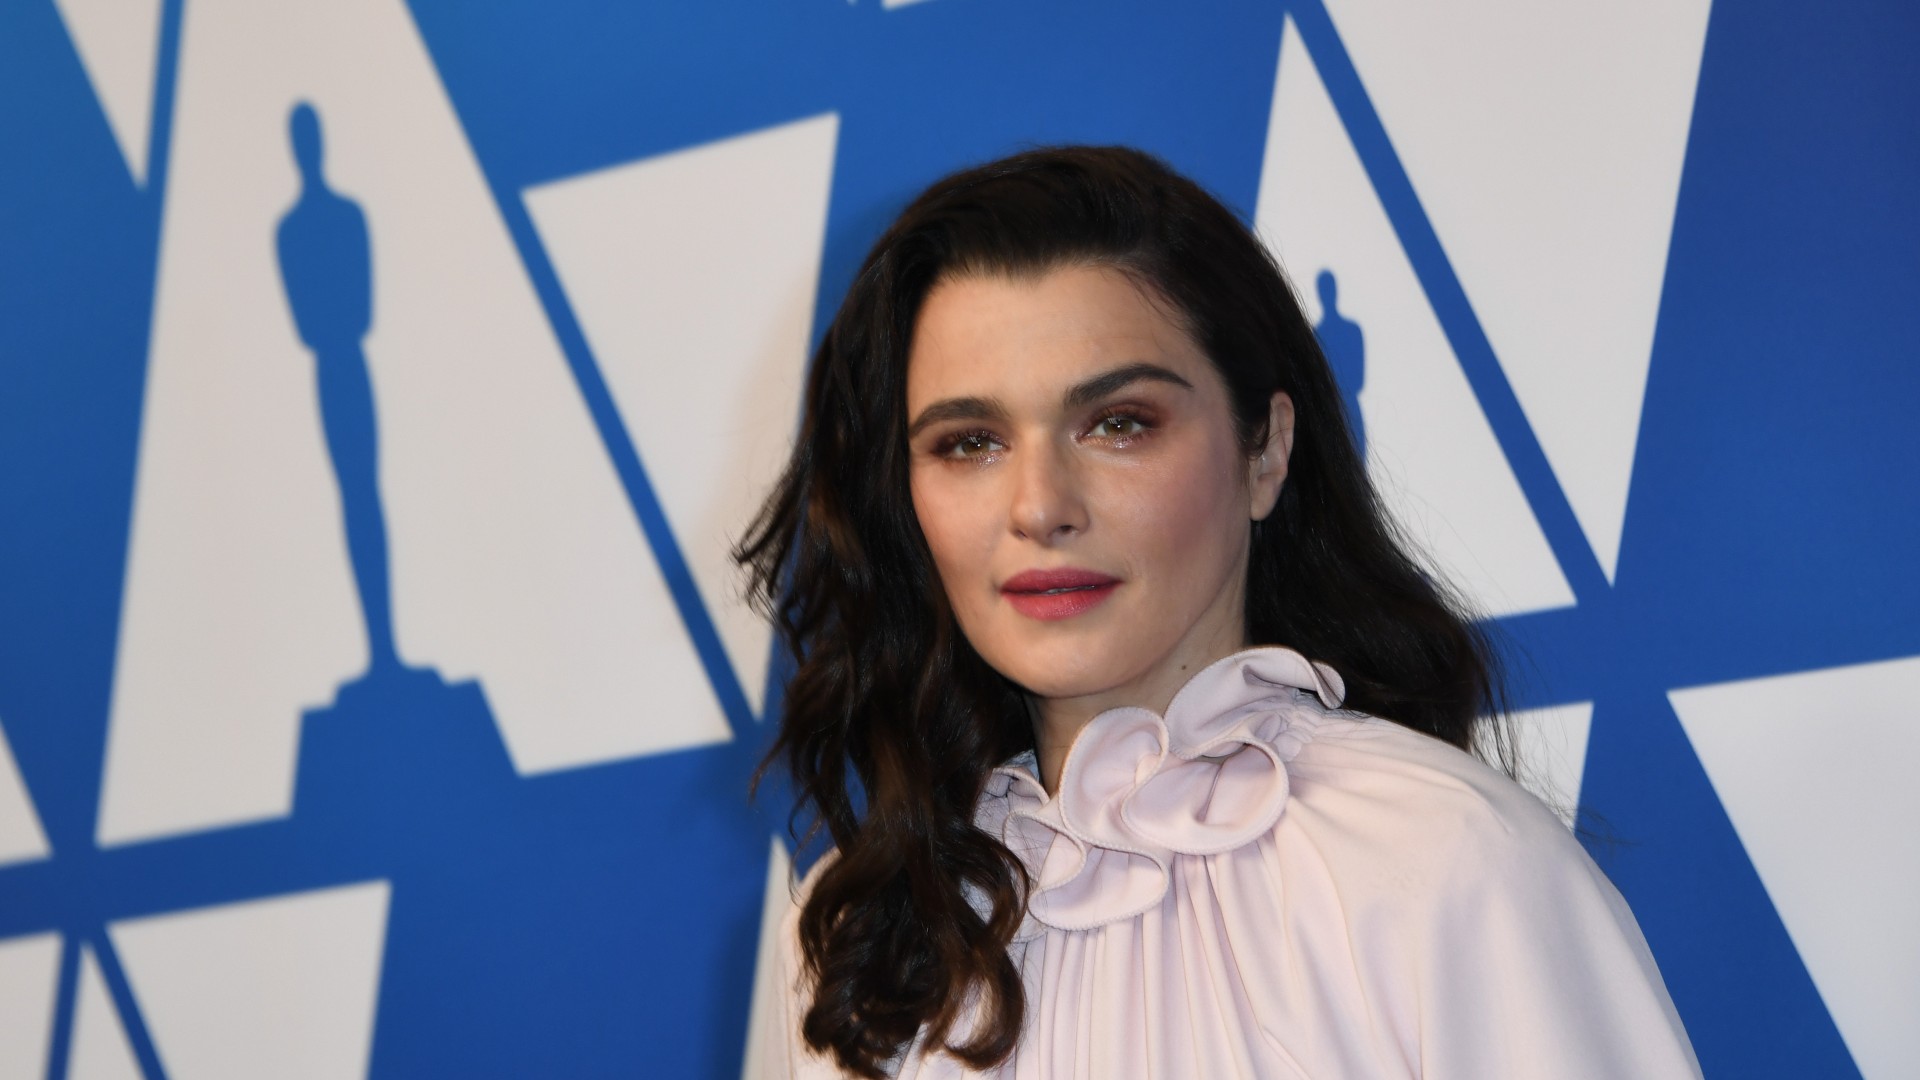 Casting News: Rachel Weisz to Play Scheming Medium in New ‘Seance on a Wet Afternoon’ Movie